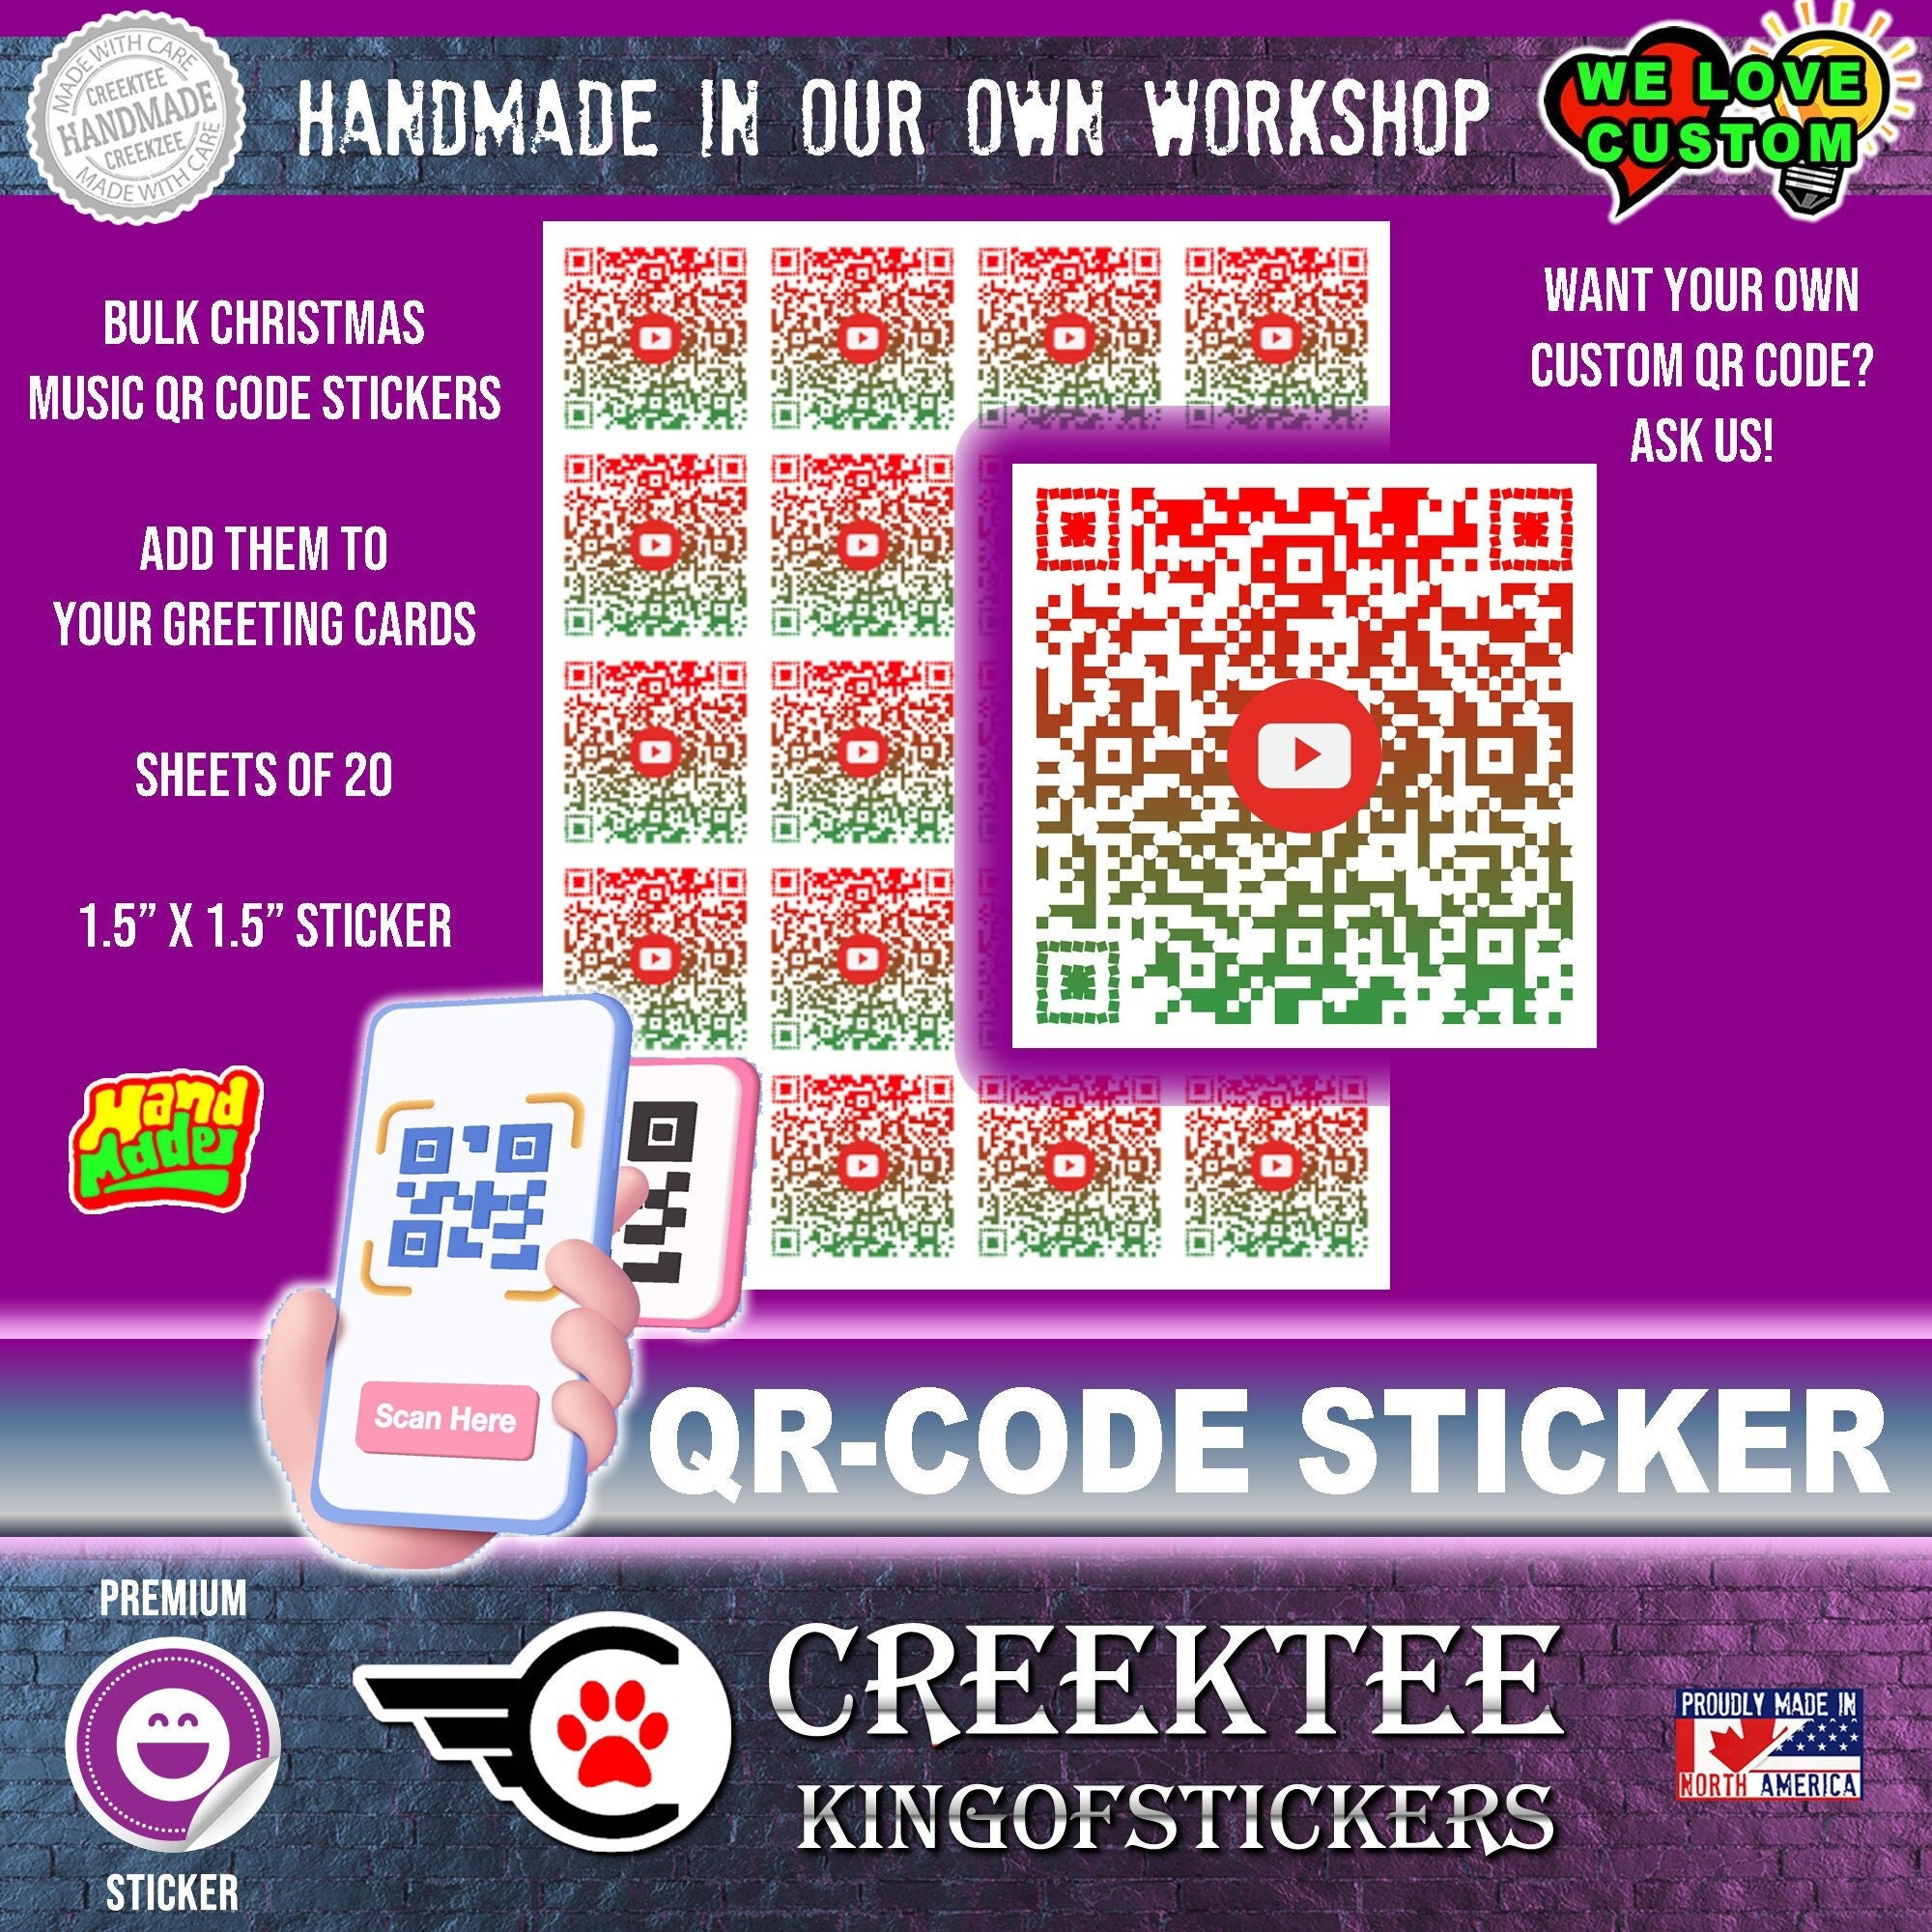 1.5 inch x 1.5 inch Christmas or Custom QR-Code Stickers in sheets of 20